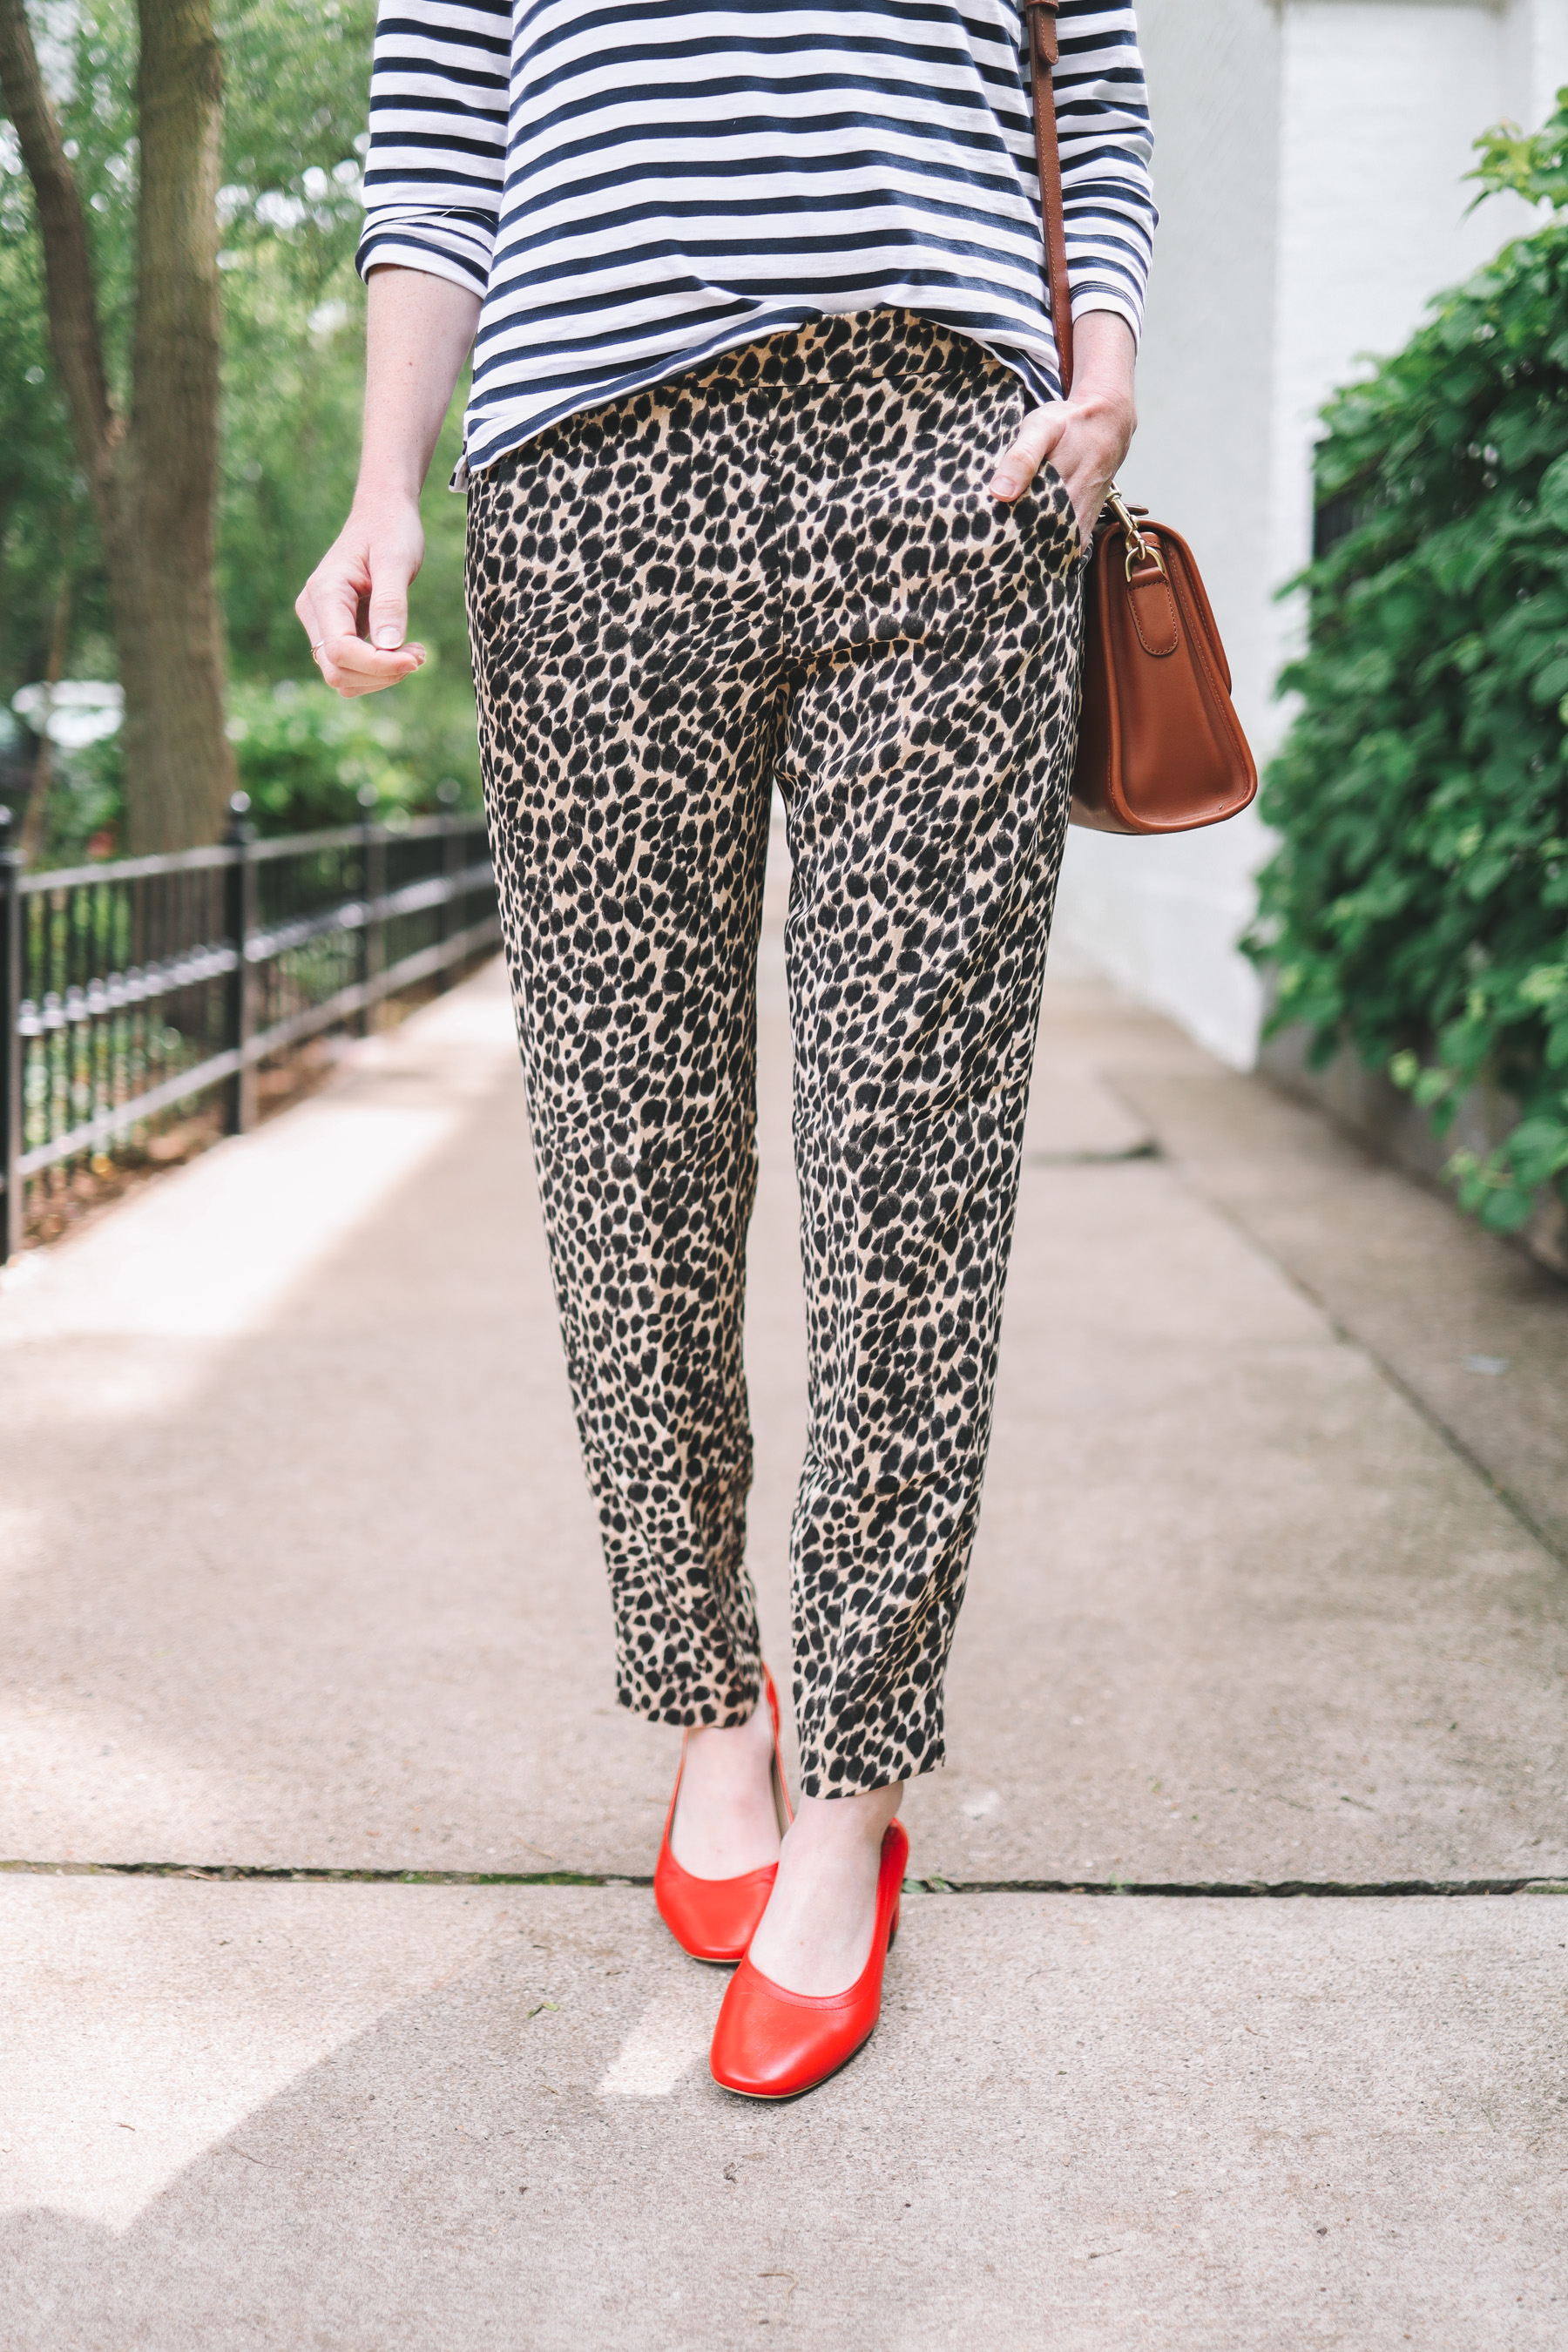 Kelly Larkin's outfit details: J.Crew Factory Pull-On Leopard Jamie Pants / Everlane Day Heels / J.Crew Striped Tee / Crossbody / Maxi-Cosi Carrier